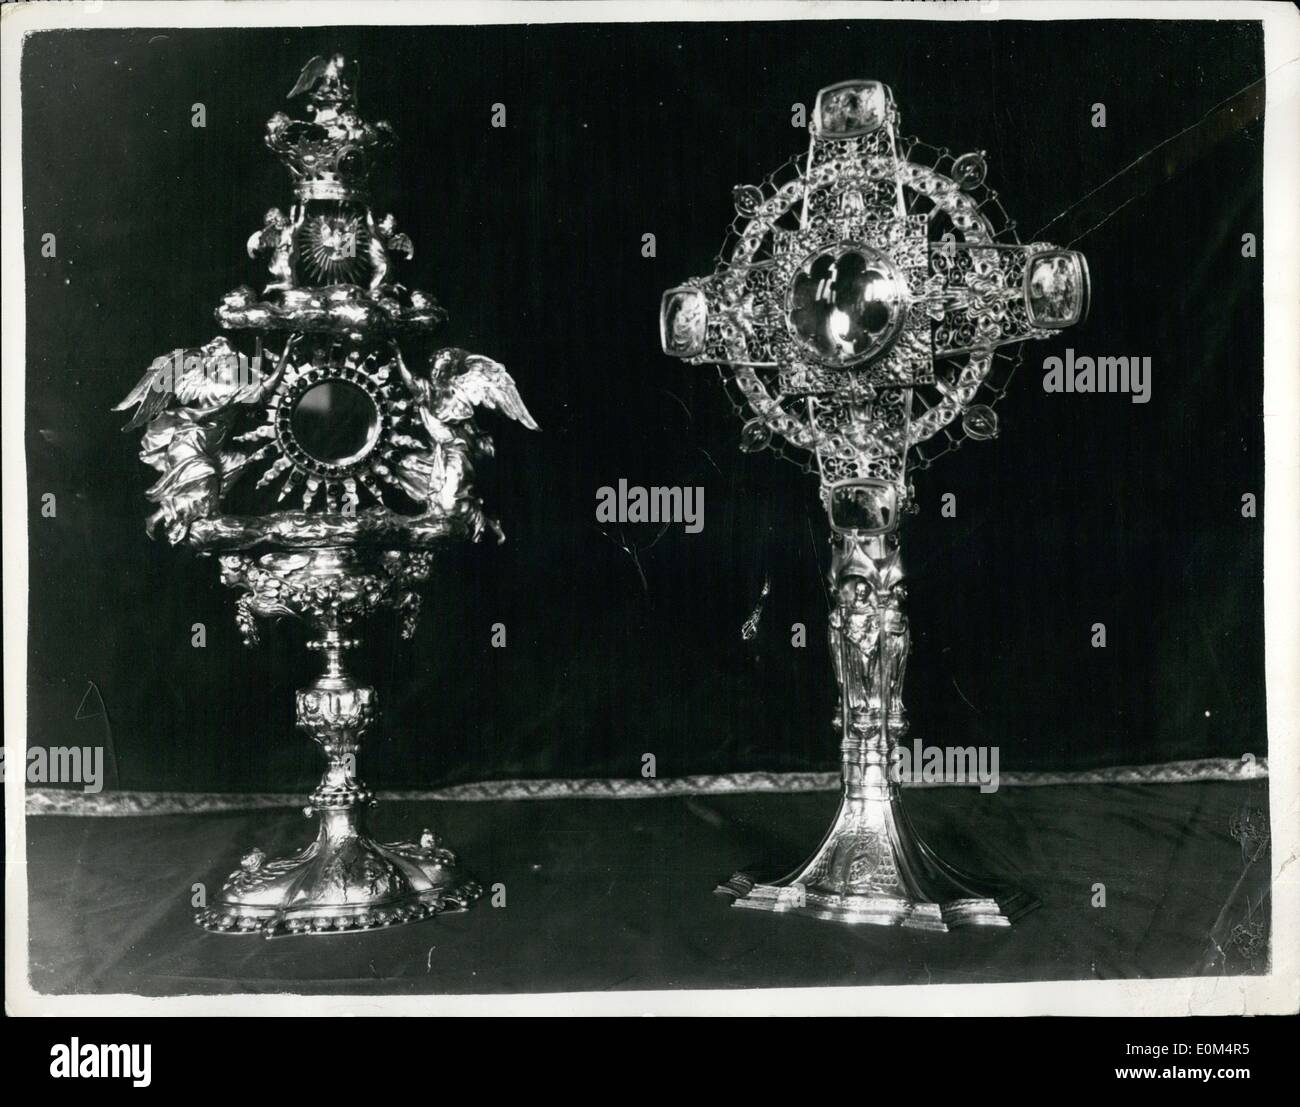 Aug. 08, 1953 - WESTMINSTER CATHEDRAL TREASURES TO BE PLACED ON EXHIBITION: Members of the public will have the opportunity of seeing the treasures of Westminster Cathedral for the first time - when they are placed on exhibition this month Keystone Photo Shows:- Two of the treasures to be exhibited: 'Left : A monstrance, Flemish. Antwerp mark 1669. Maker Jean Maermans. Large silver gilt monstrance, centre jewelled with garnets, acquamarines, crystals and almandine garnets. The crown set with Cabochon emeralds. (Right): Monstrance. Maker, Omar Ramsden Stock Photo